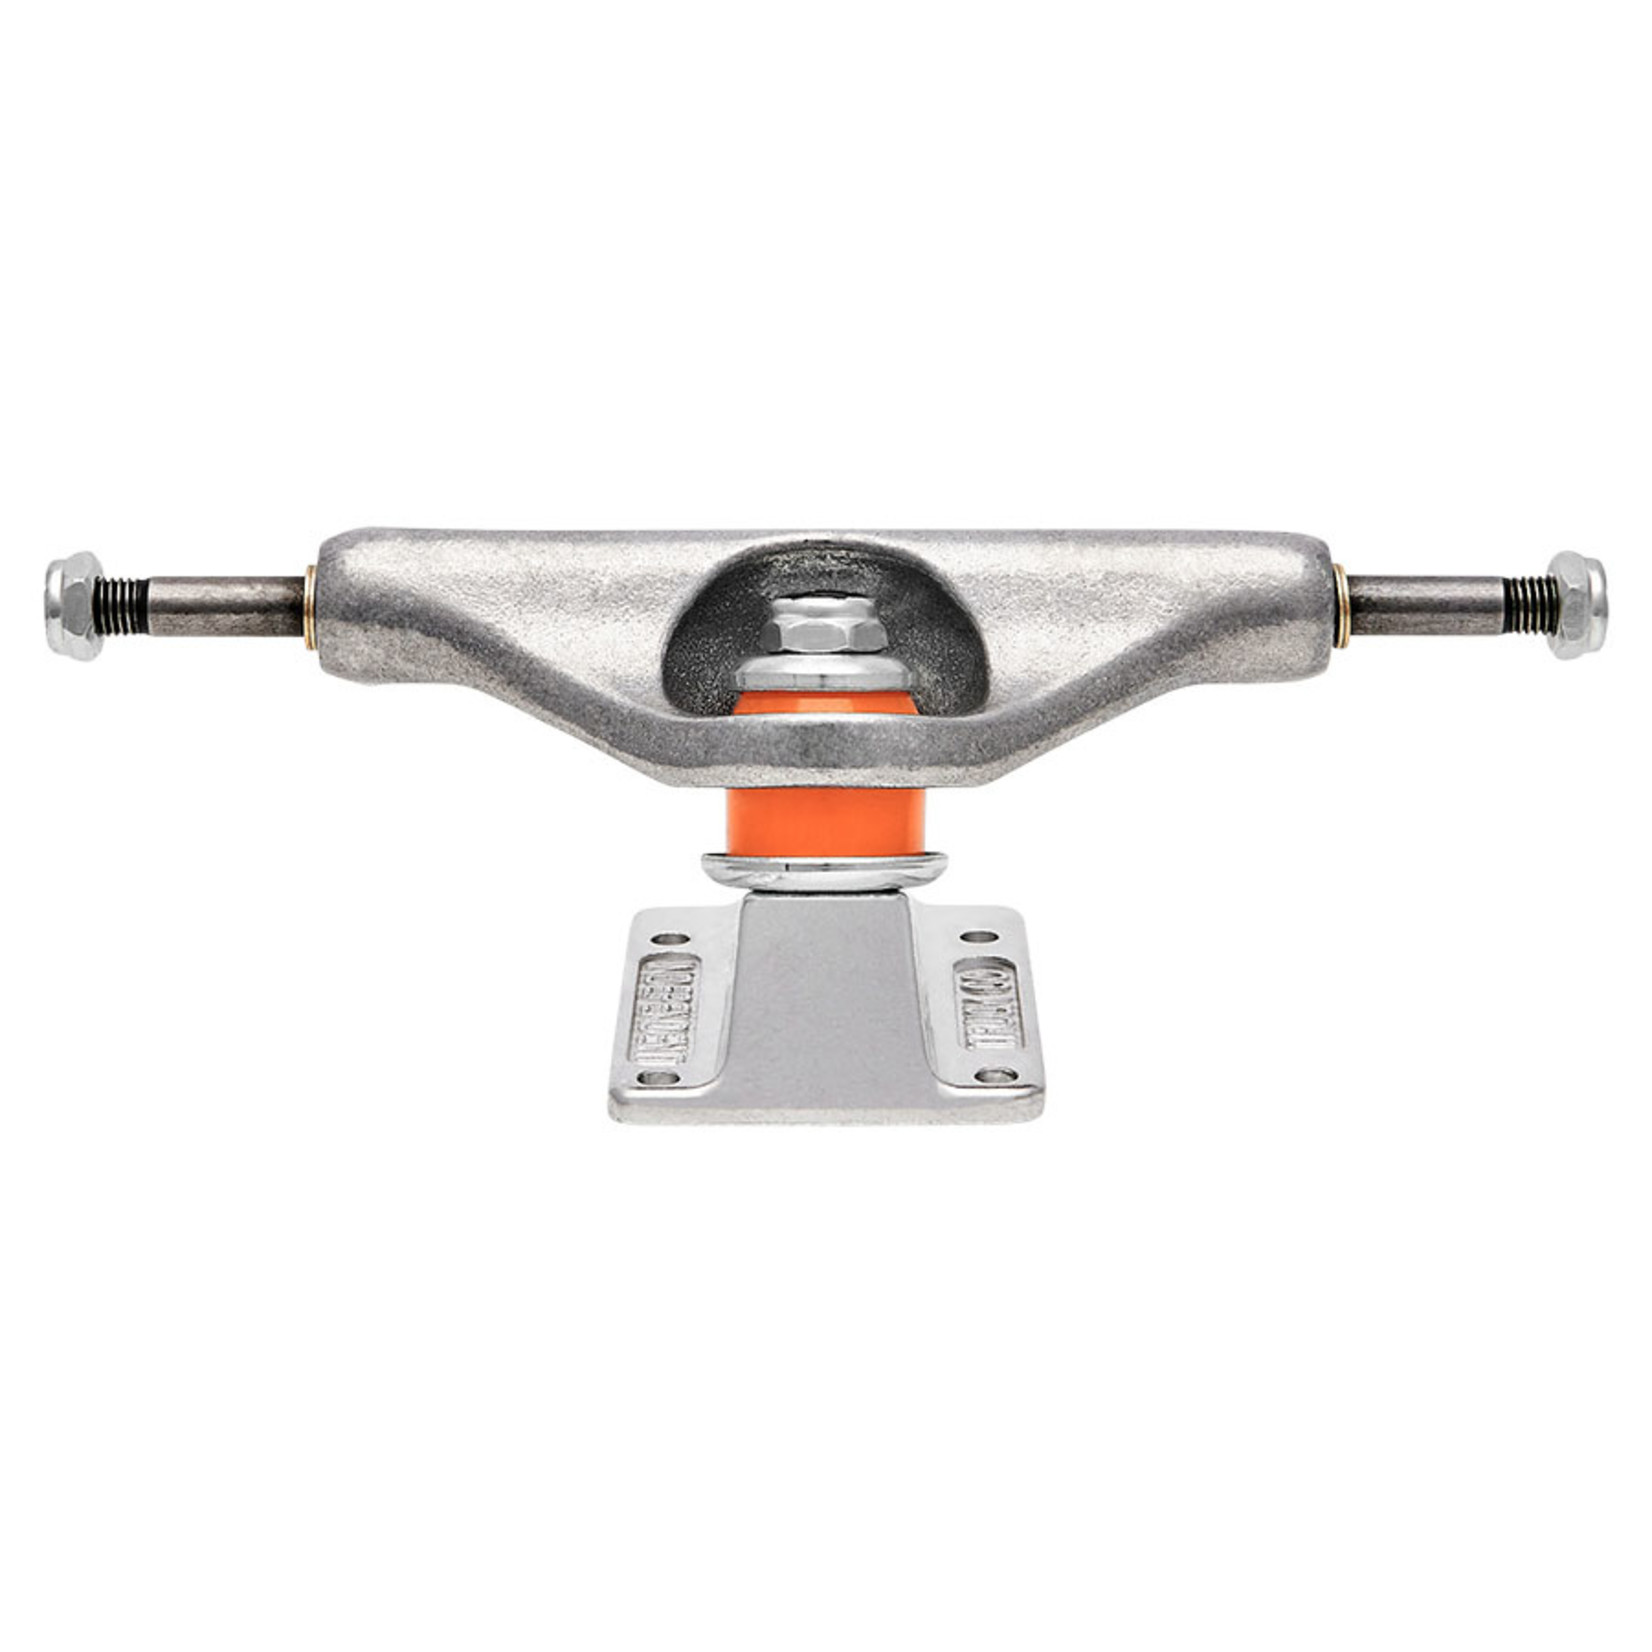 Independant Independent Stage 11 Forged Hollow Standard Trucks